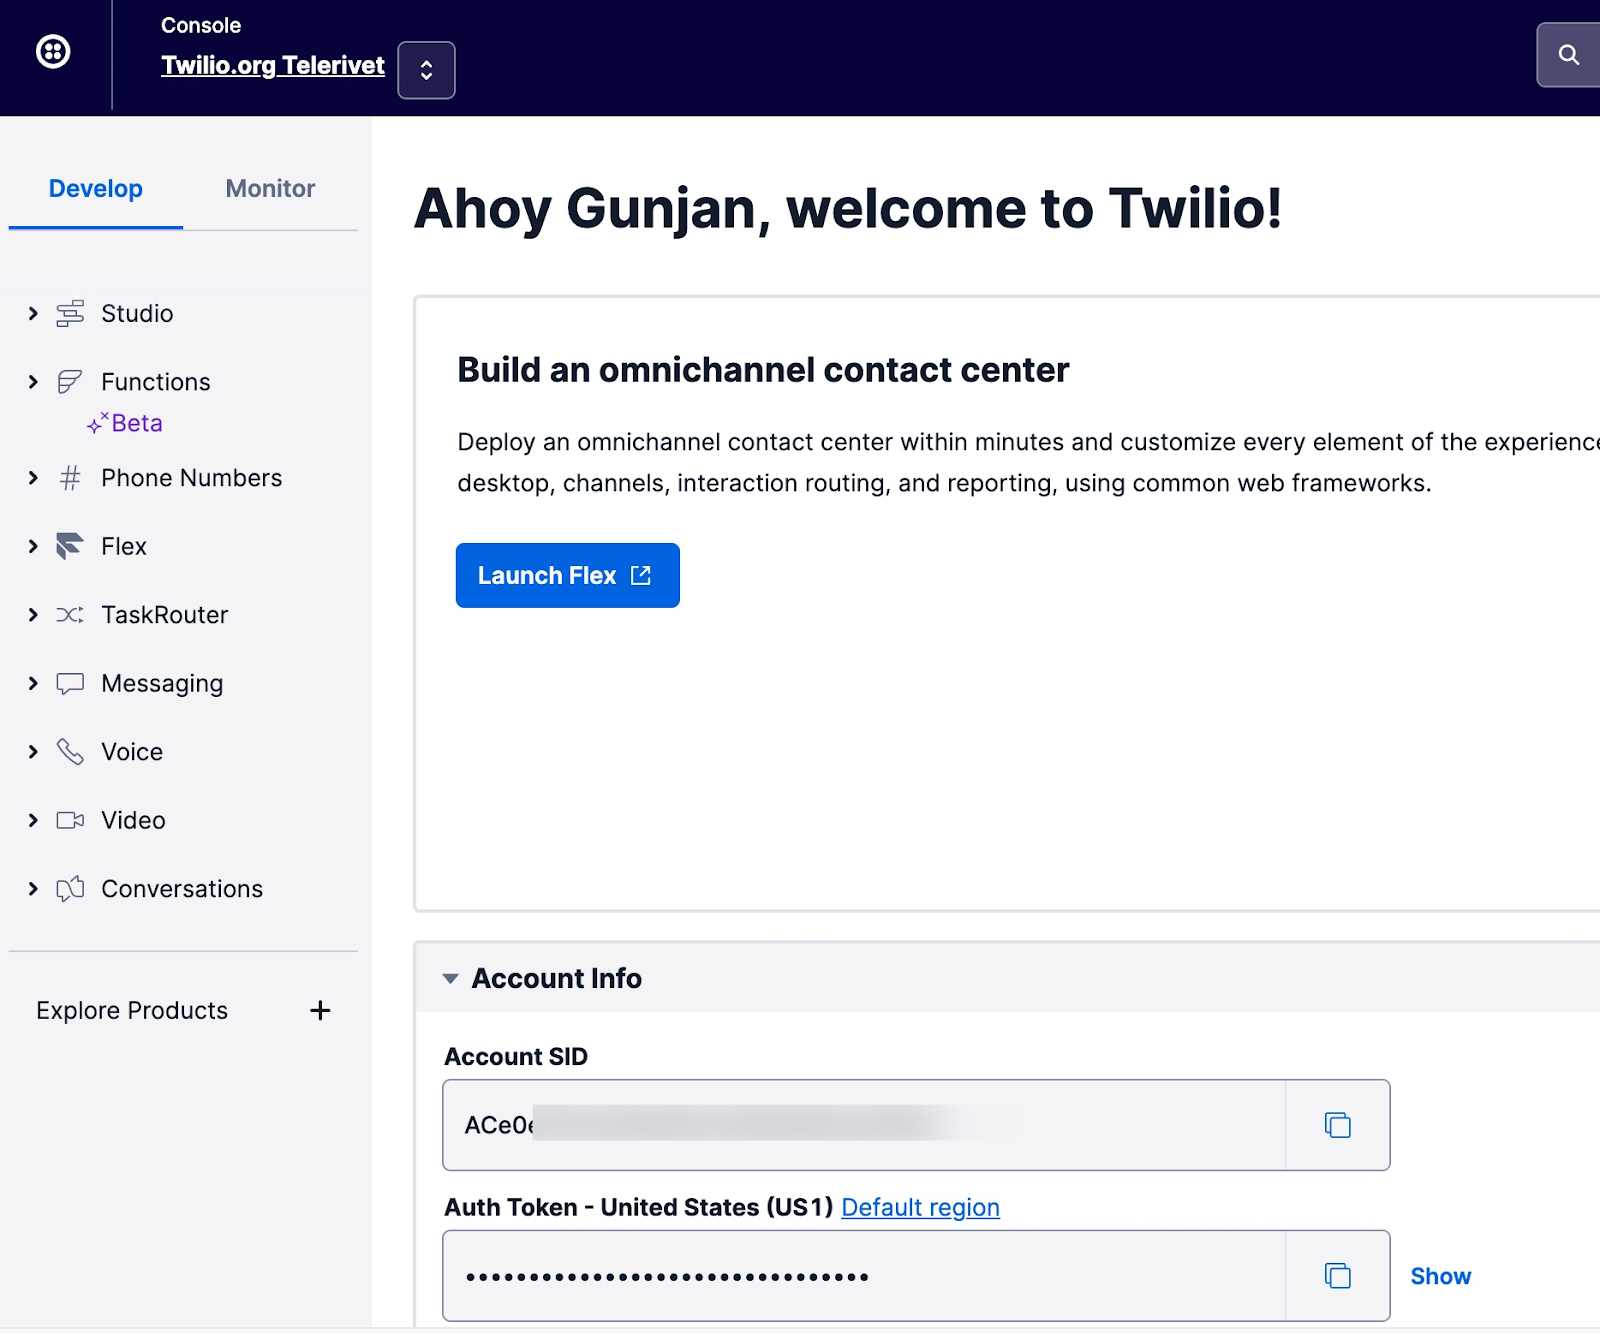 Account SID and Auth Token in the Twilio Console